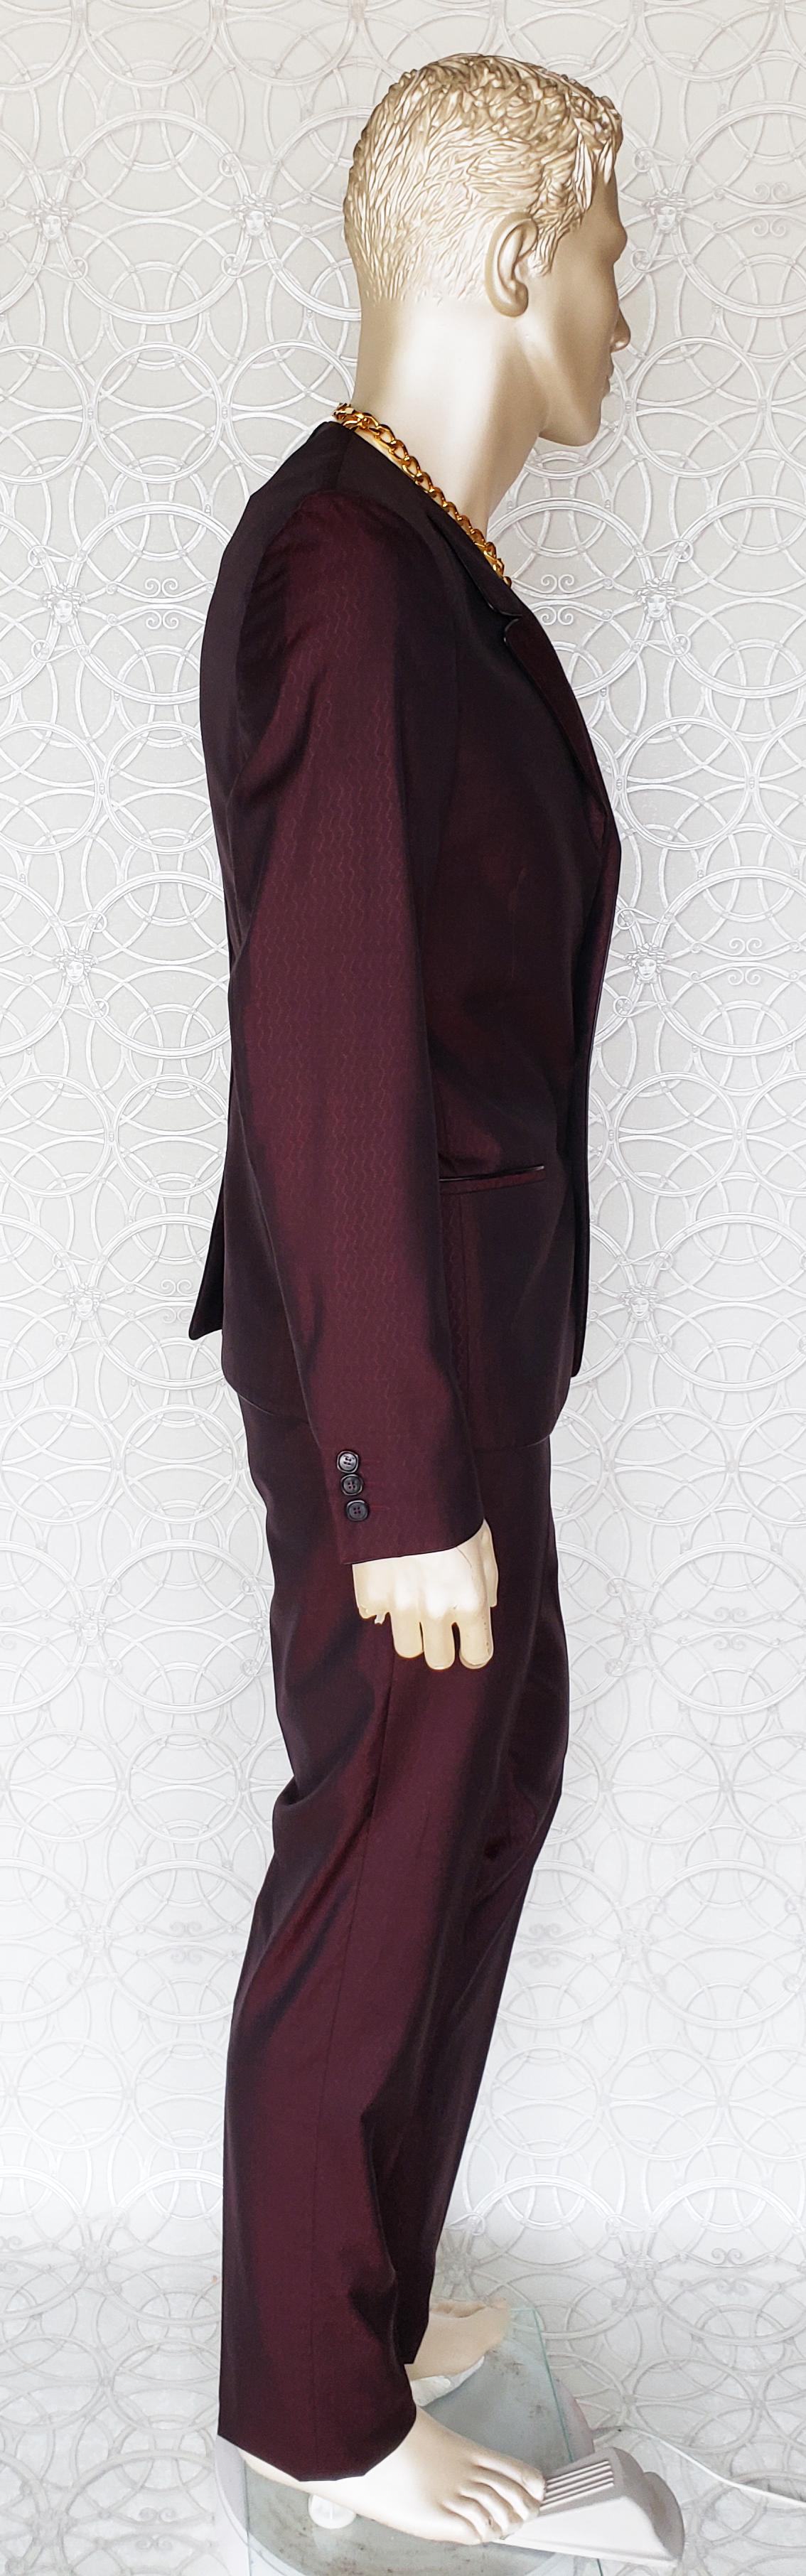 S/S 2011 look #19 NEW VERSACE BURGUNDY WOOL and SILK SUIT 48 - 38 (M) For Sale 1